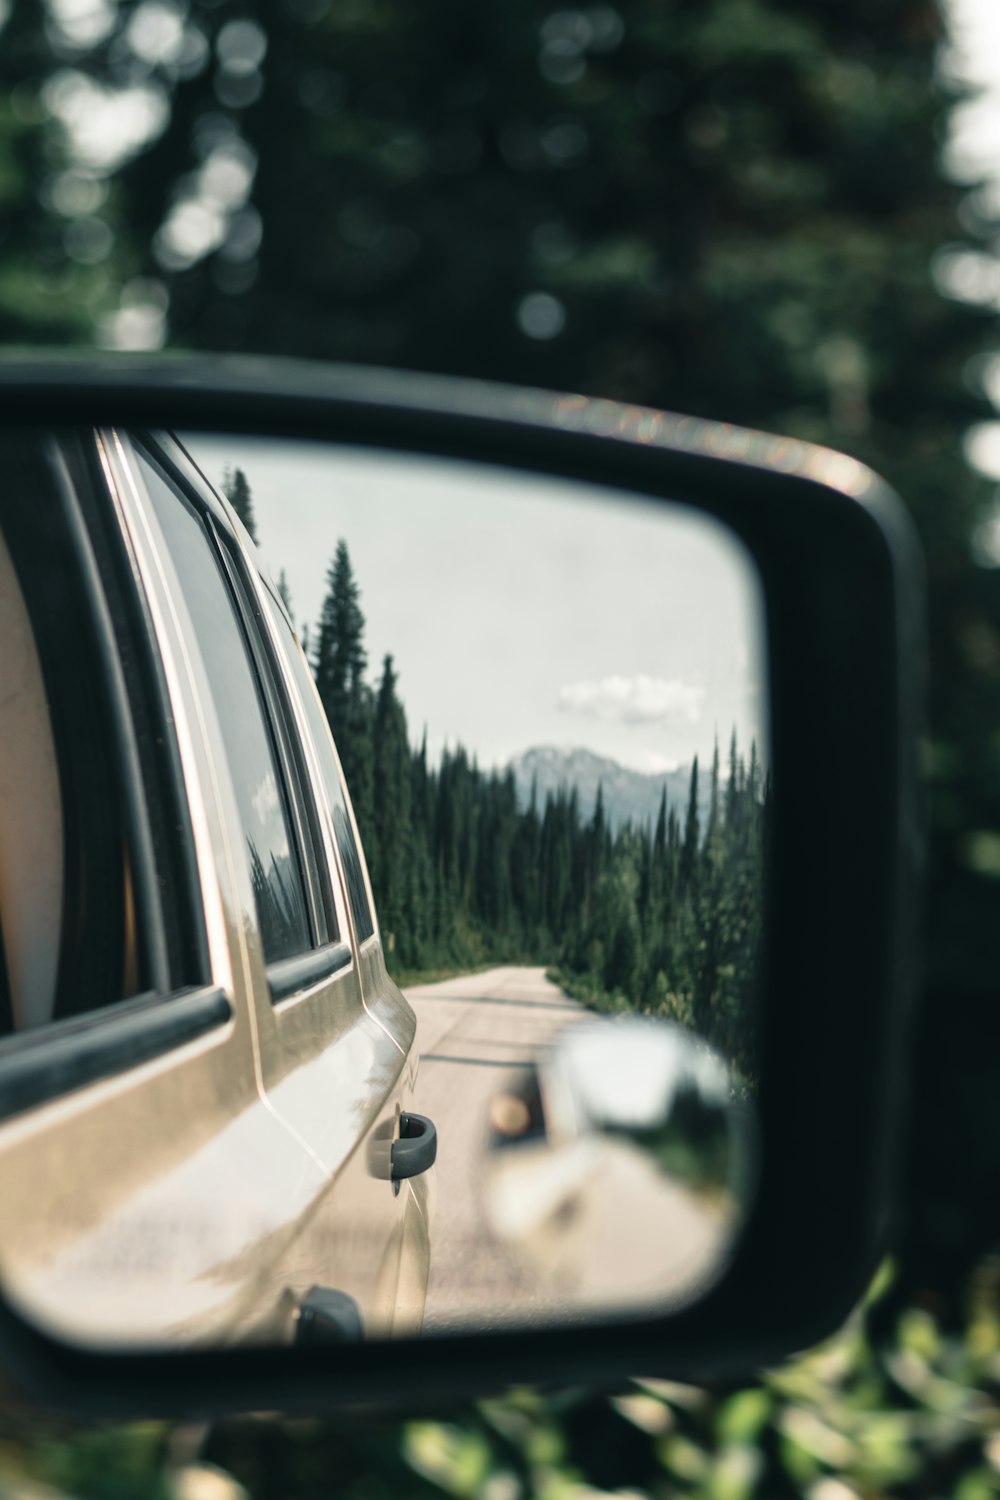 a car's side view mirror reflecting a road in the rear view mirror